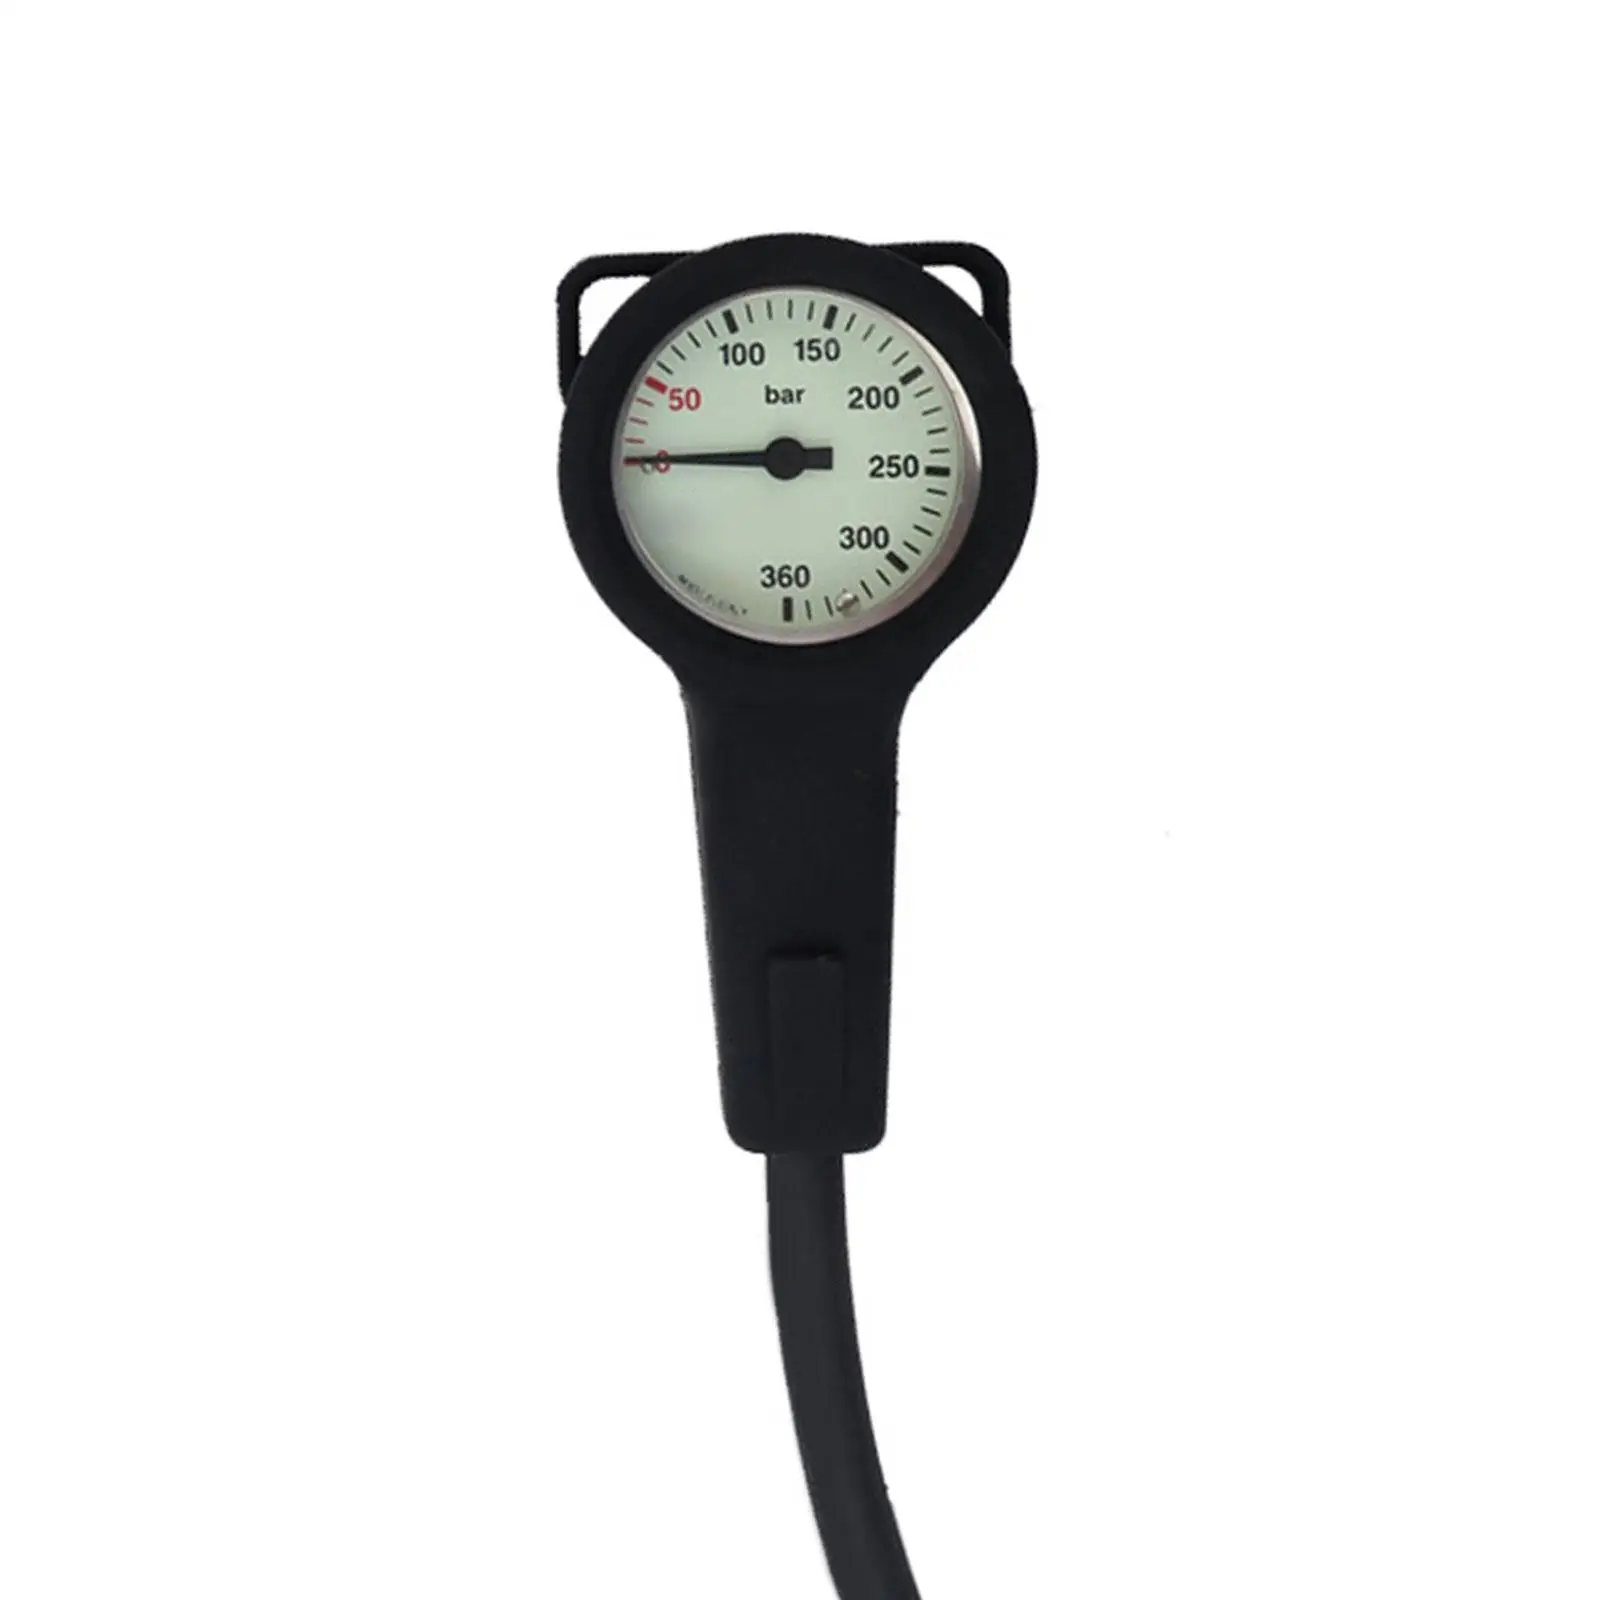 Scuba Pressure Gauge Boot Spg Submersible Pressure Gauge First Stage Metal High Pressure Gauge with Loops Protector Rubber Cover